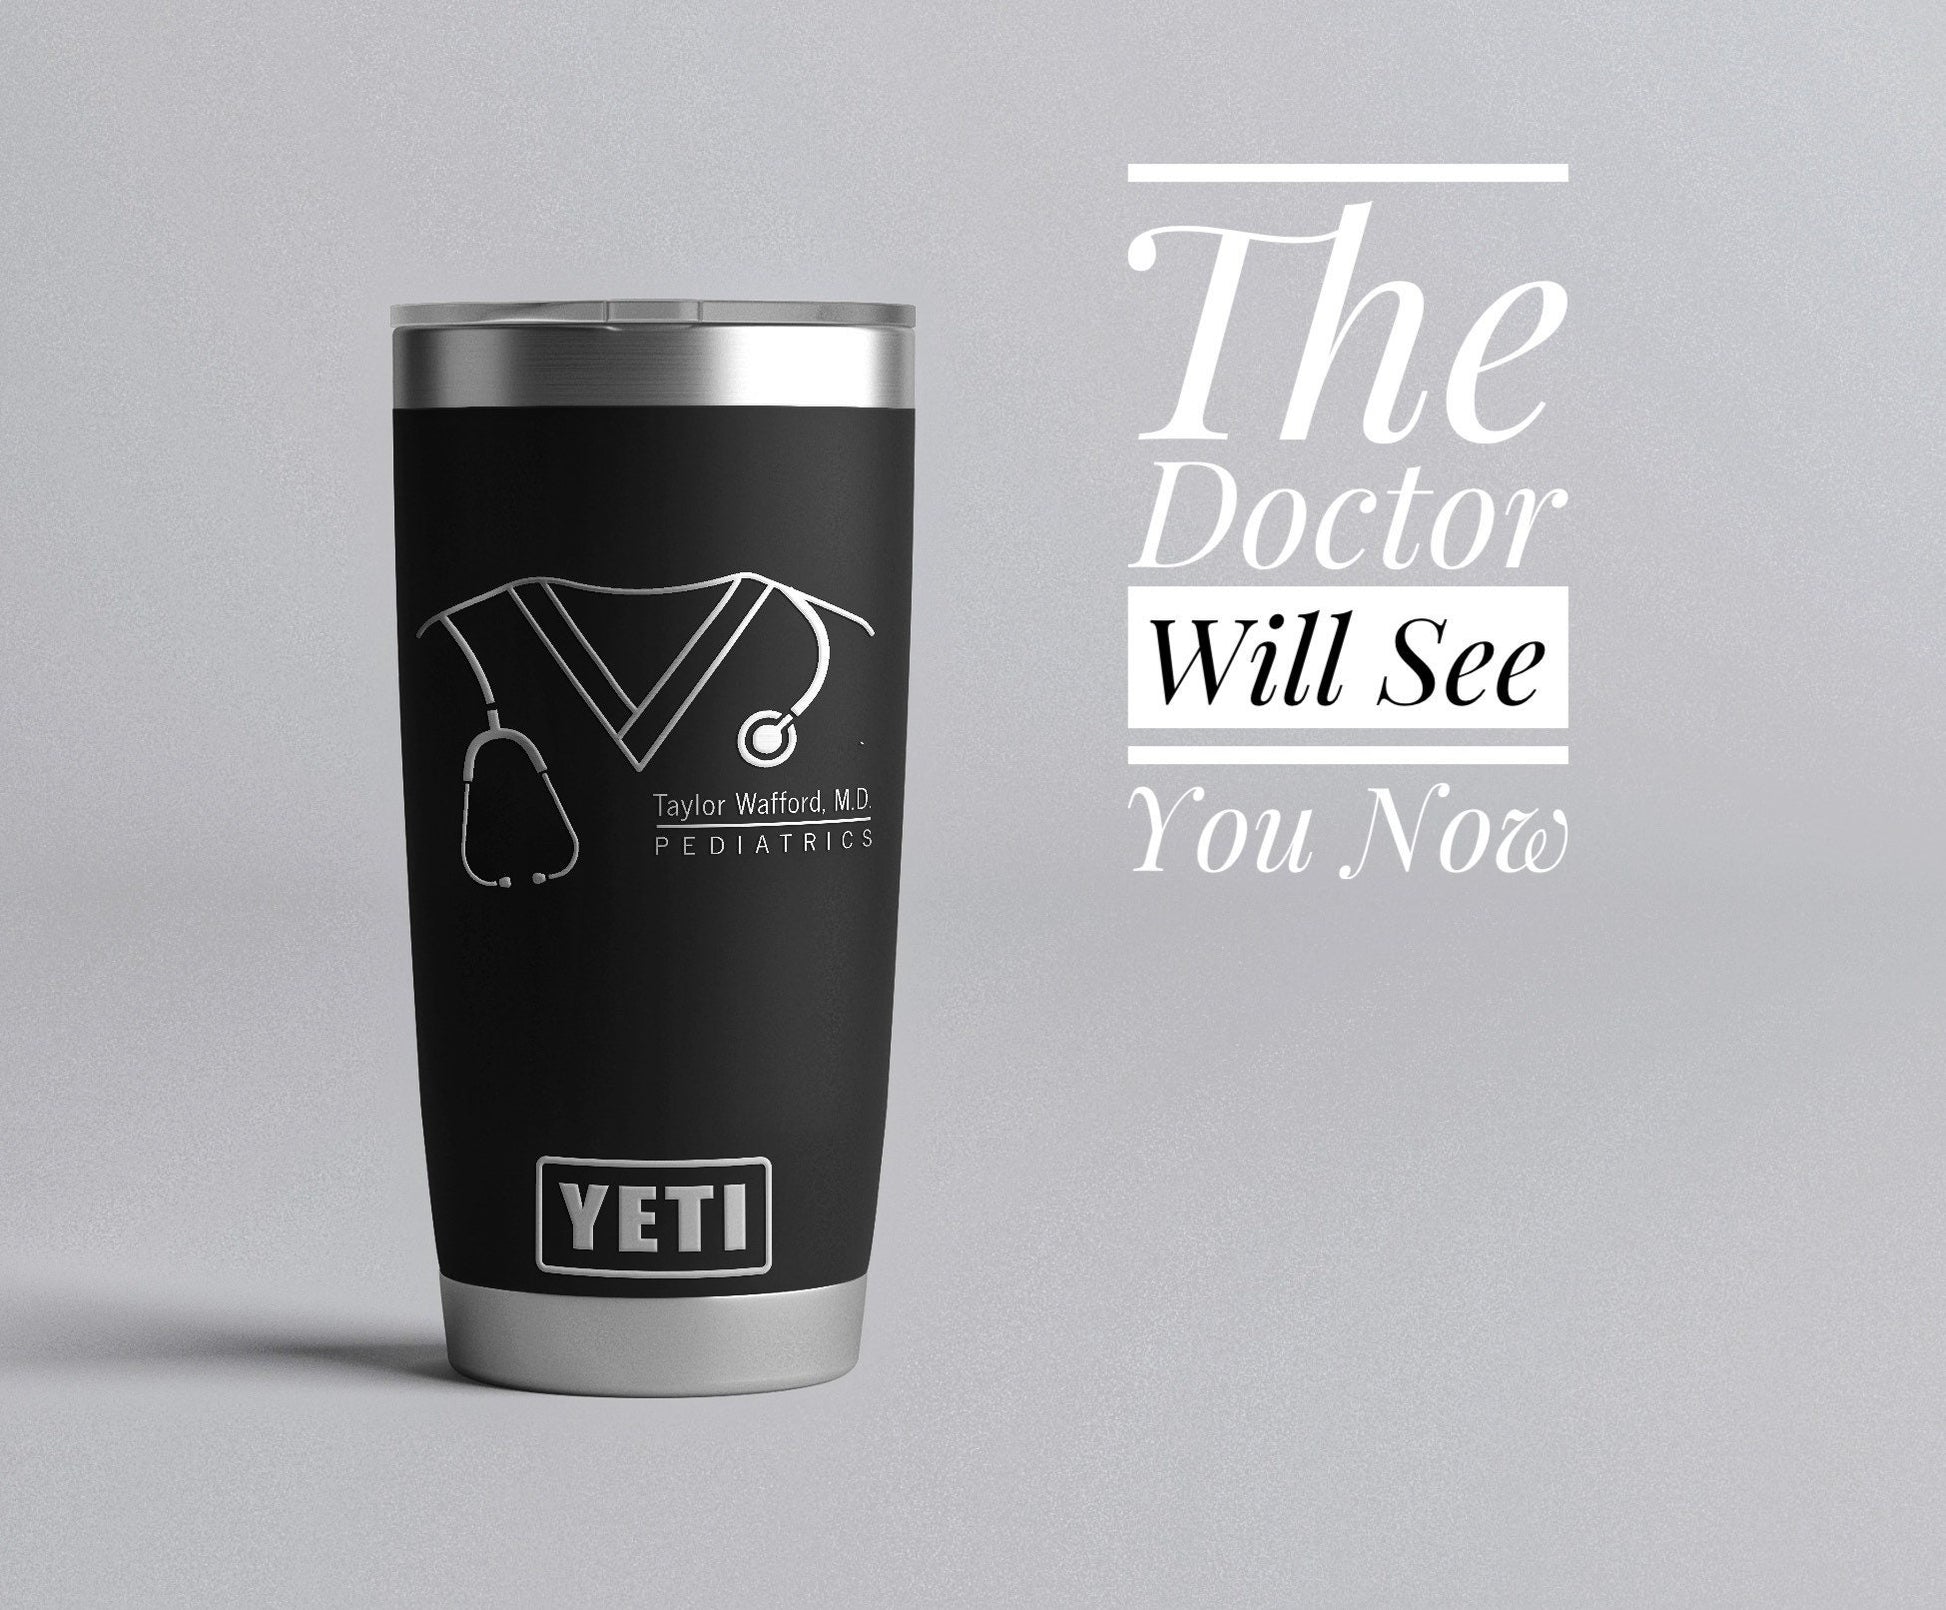 Personalized Custom Engraved YETI® W/ Lid or Polar Camel Wine Tumbler  Birthday Gift Logo Unique Book Movie Quote Song Lyric Verse 